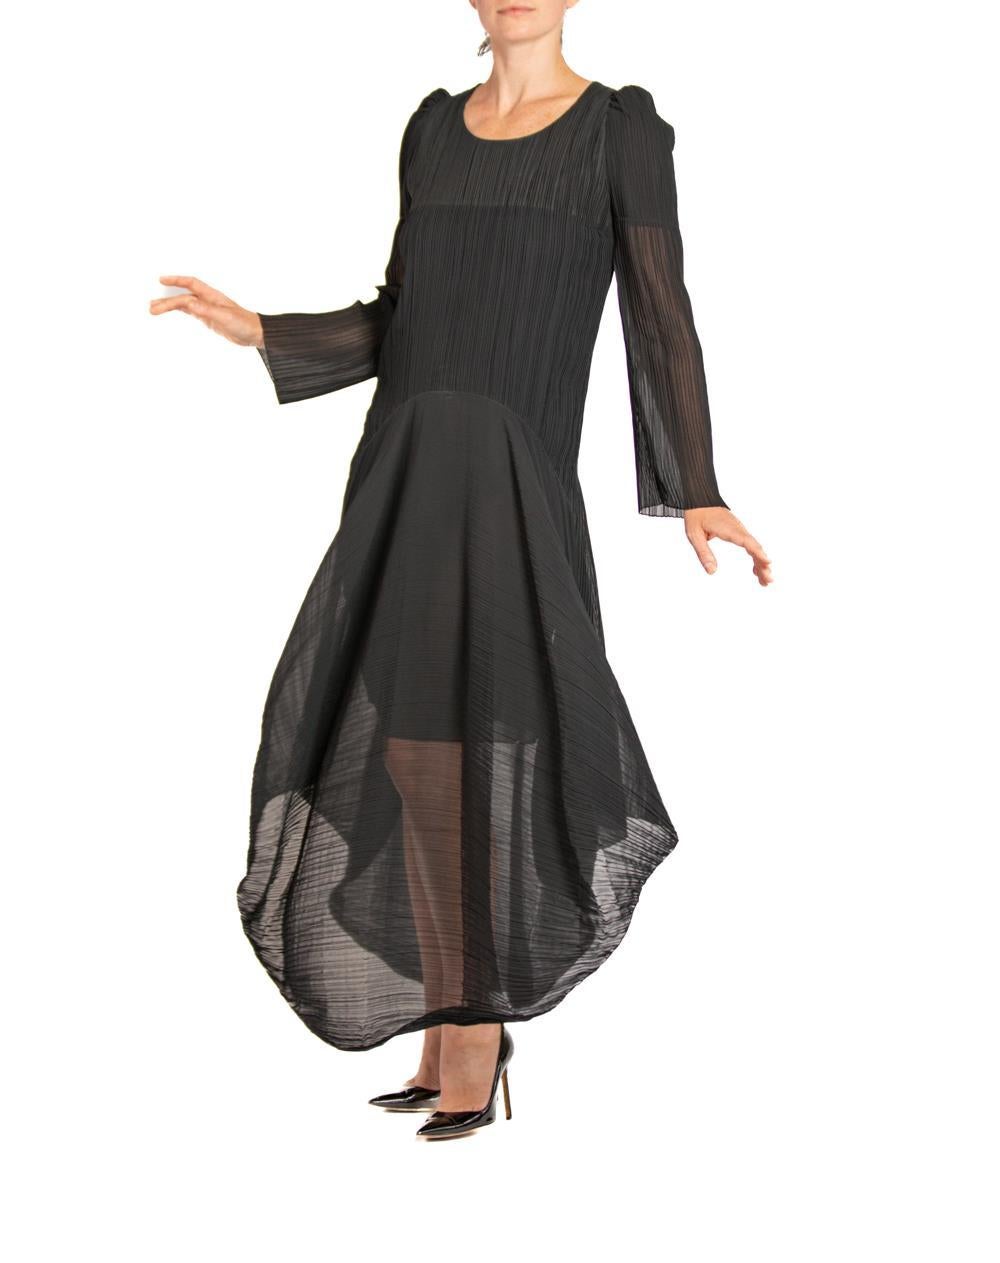 1980S KARL LAGERFELD CHLOE Black Pleated Chiffon Dress With Sleeves For Sale 1